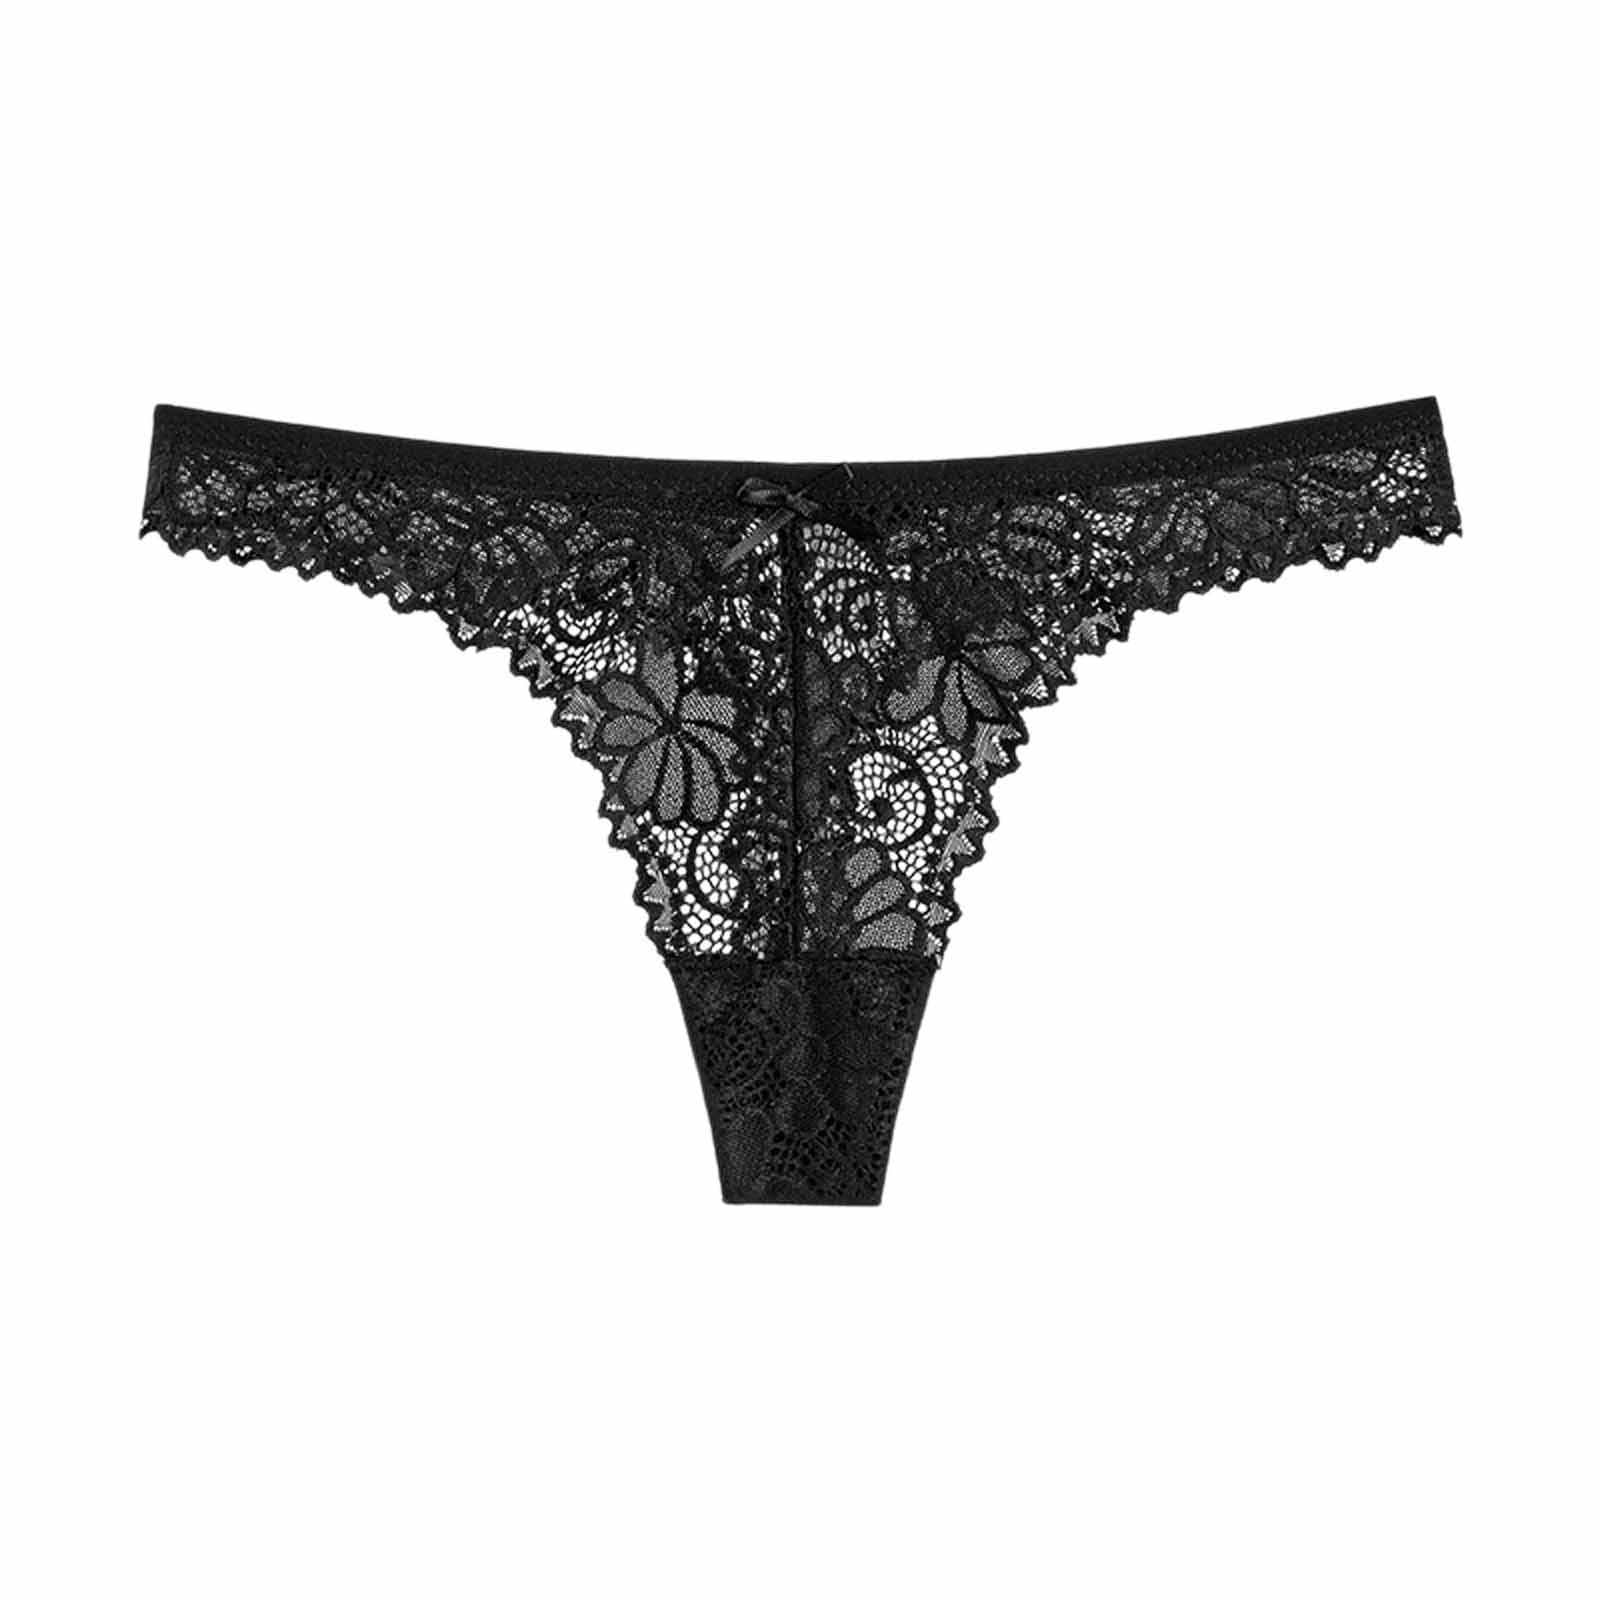 CHGBMOK Women's Lace See-Through Lingerie Sexy Thongs Panties Hipster  Underwear 